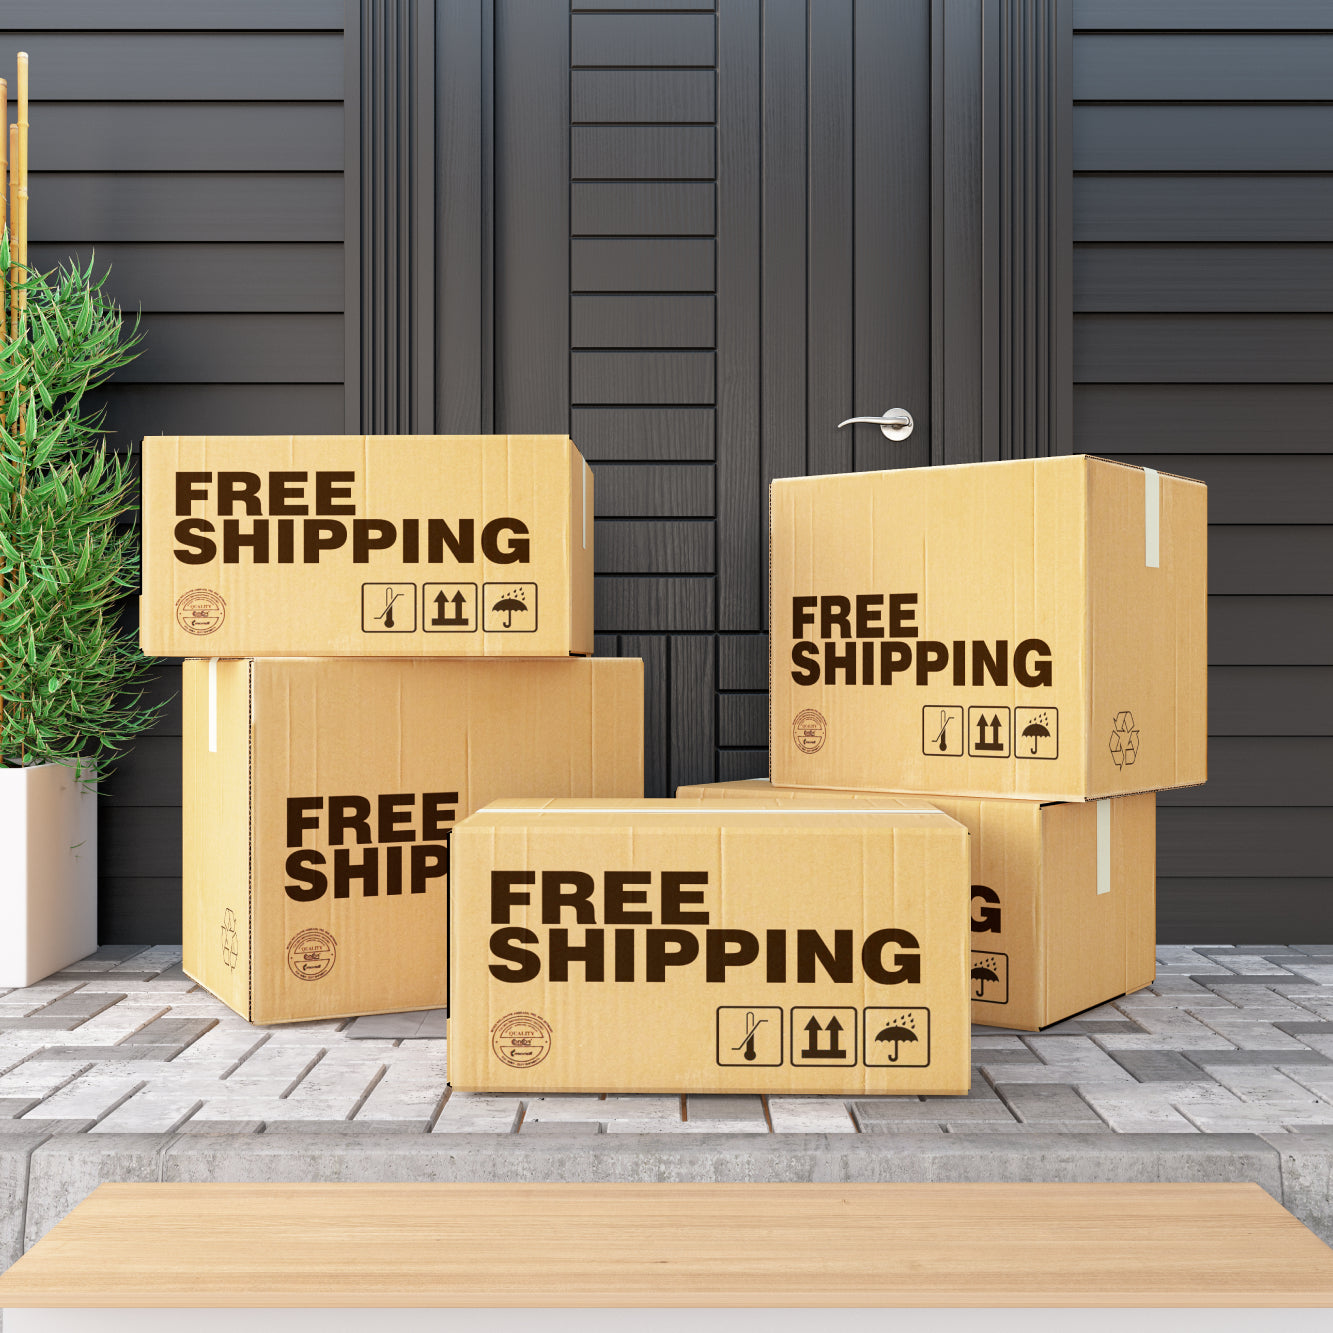 Free Delivery on orders over $99*